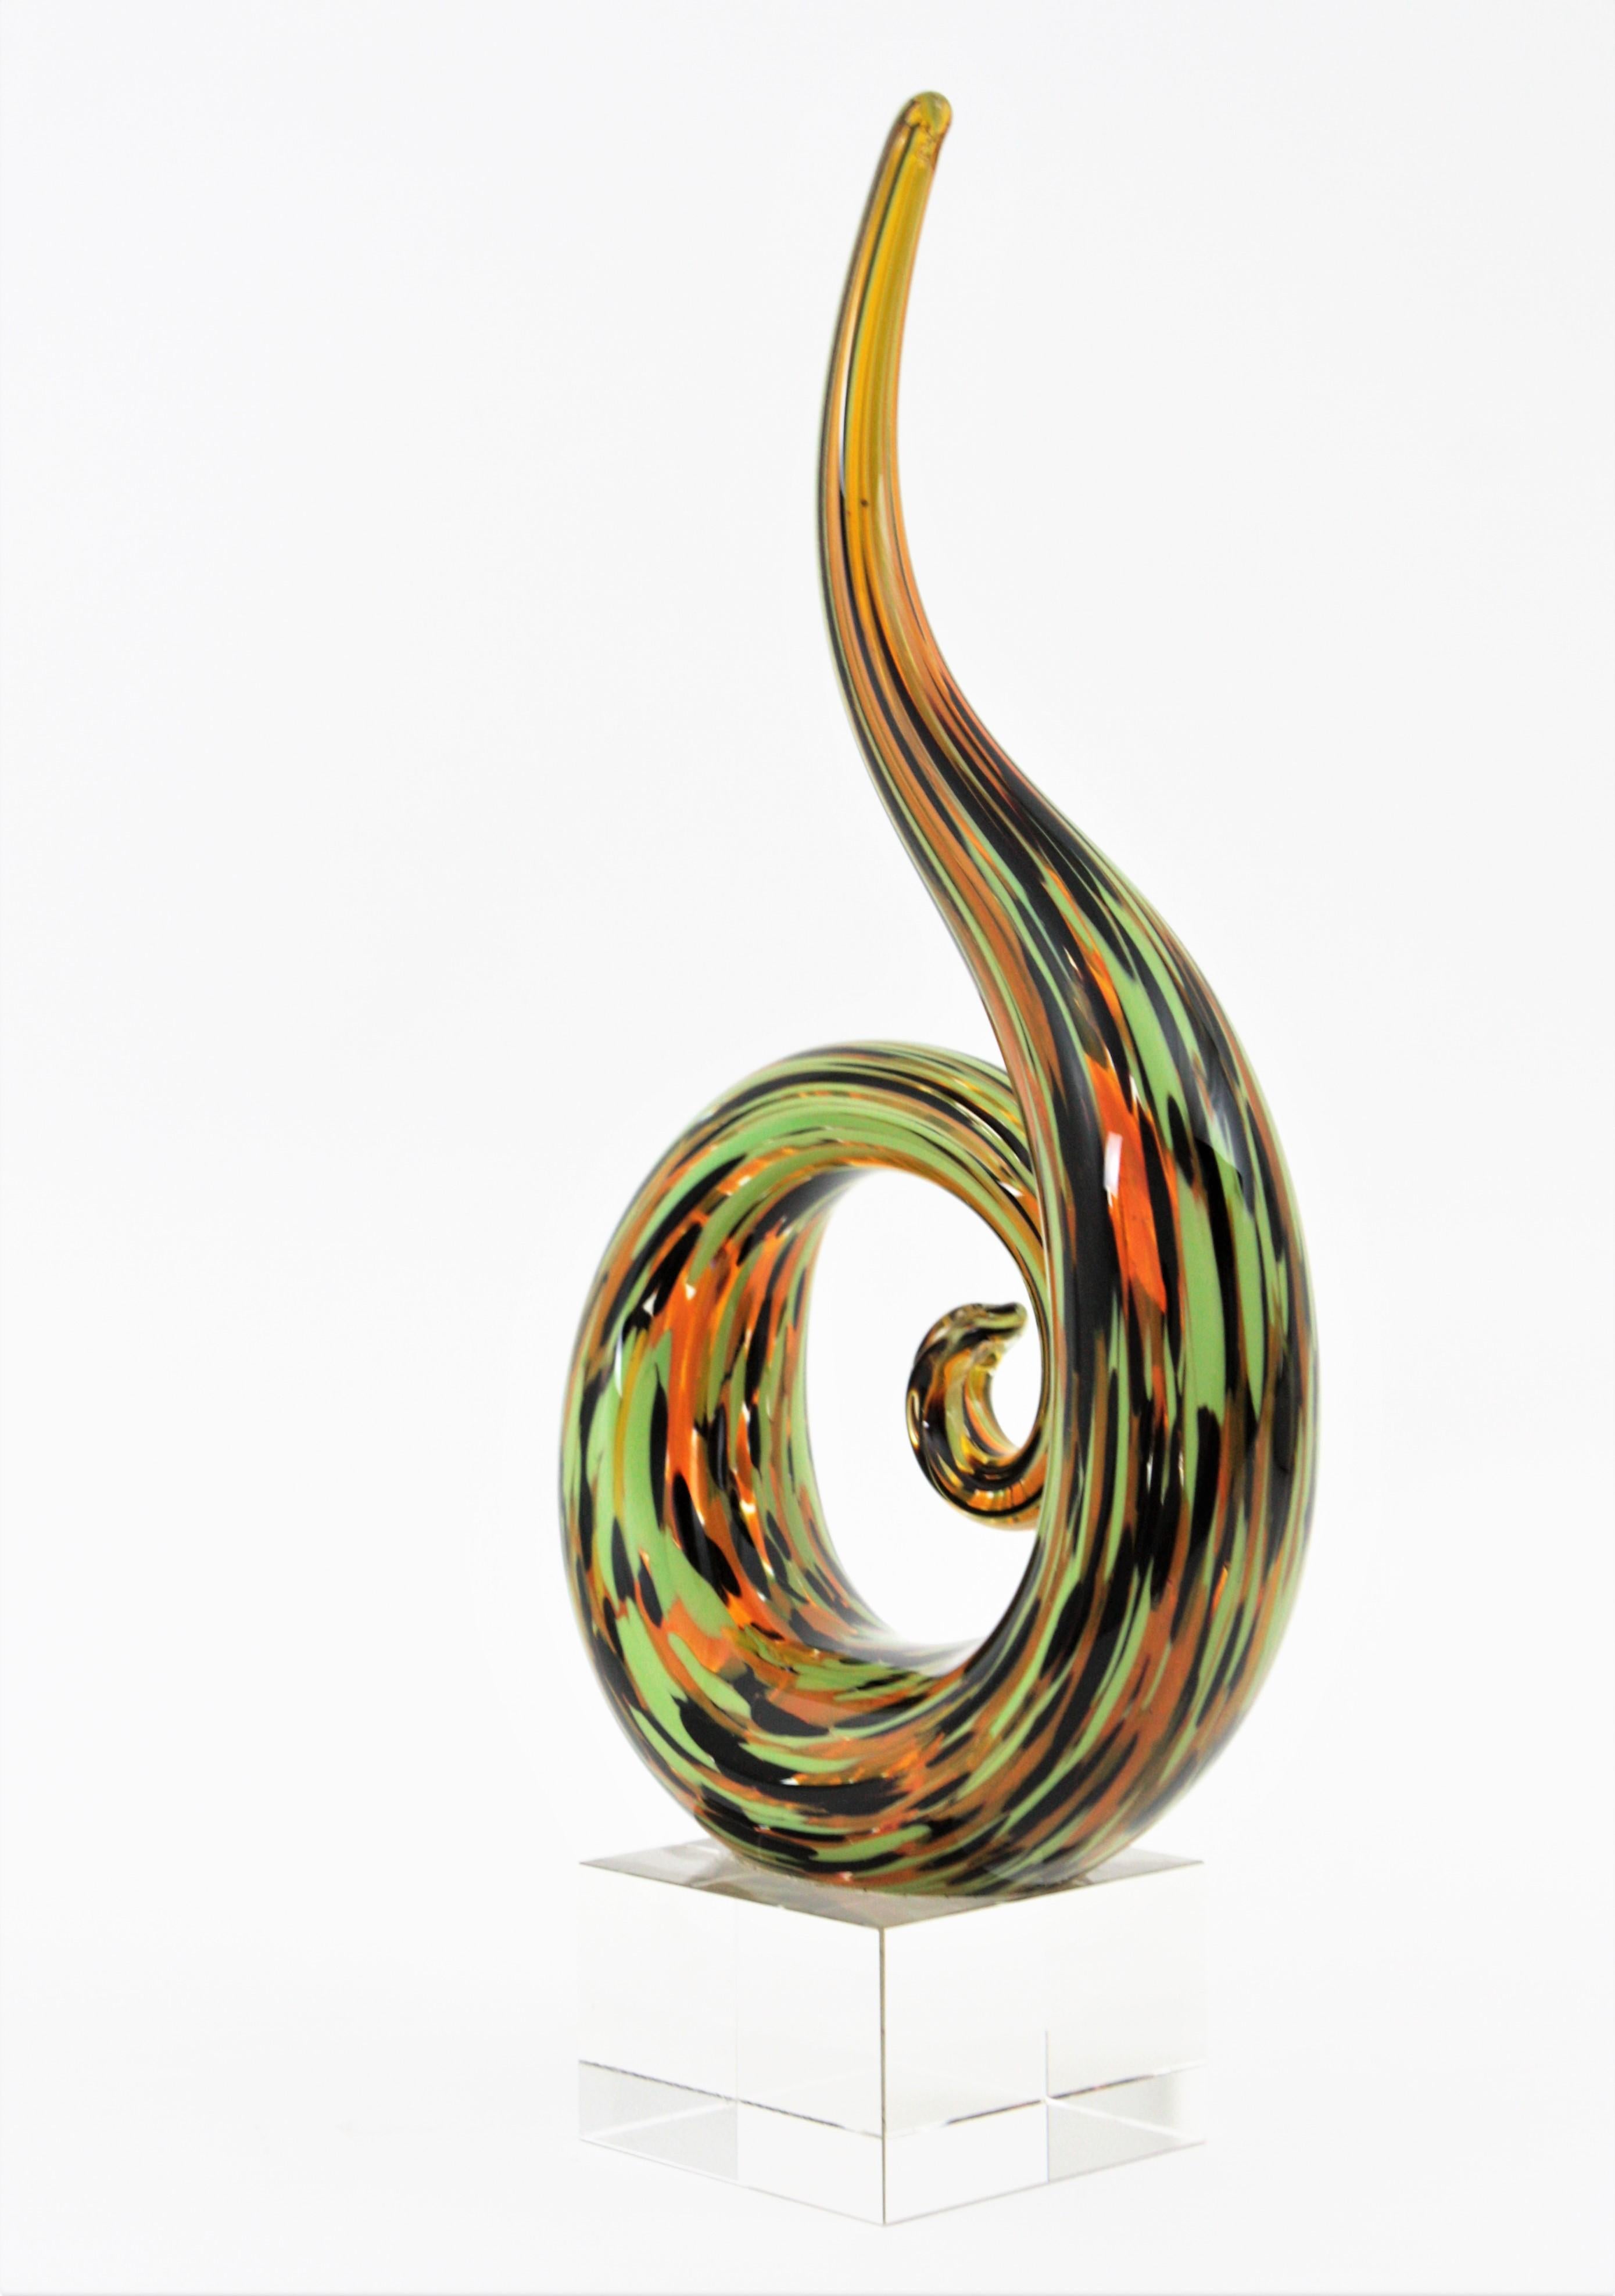 Italian Murano Art Glass Multi Color Spiral Paperweight Sculpture, Italy, 1960s For Sale